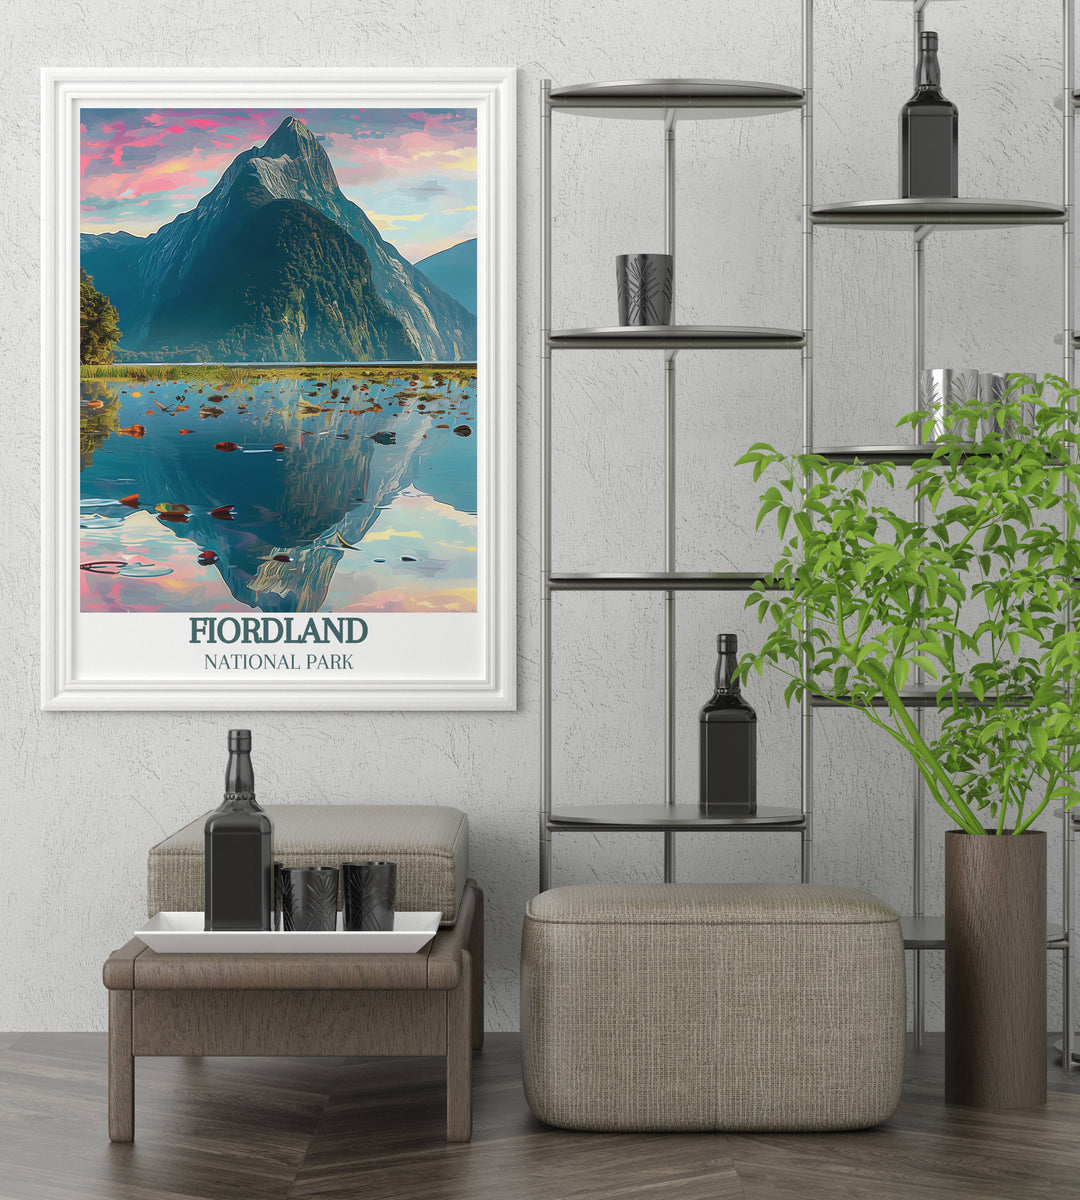 Fiordlands Mitre Peak bathed in the soft glow of dusk, emphasizing the peaceful solitude of the area in a beautifully crafted travel poster.